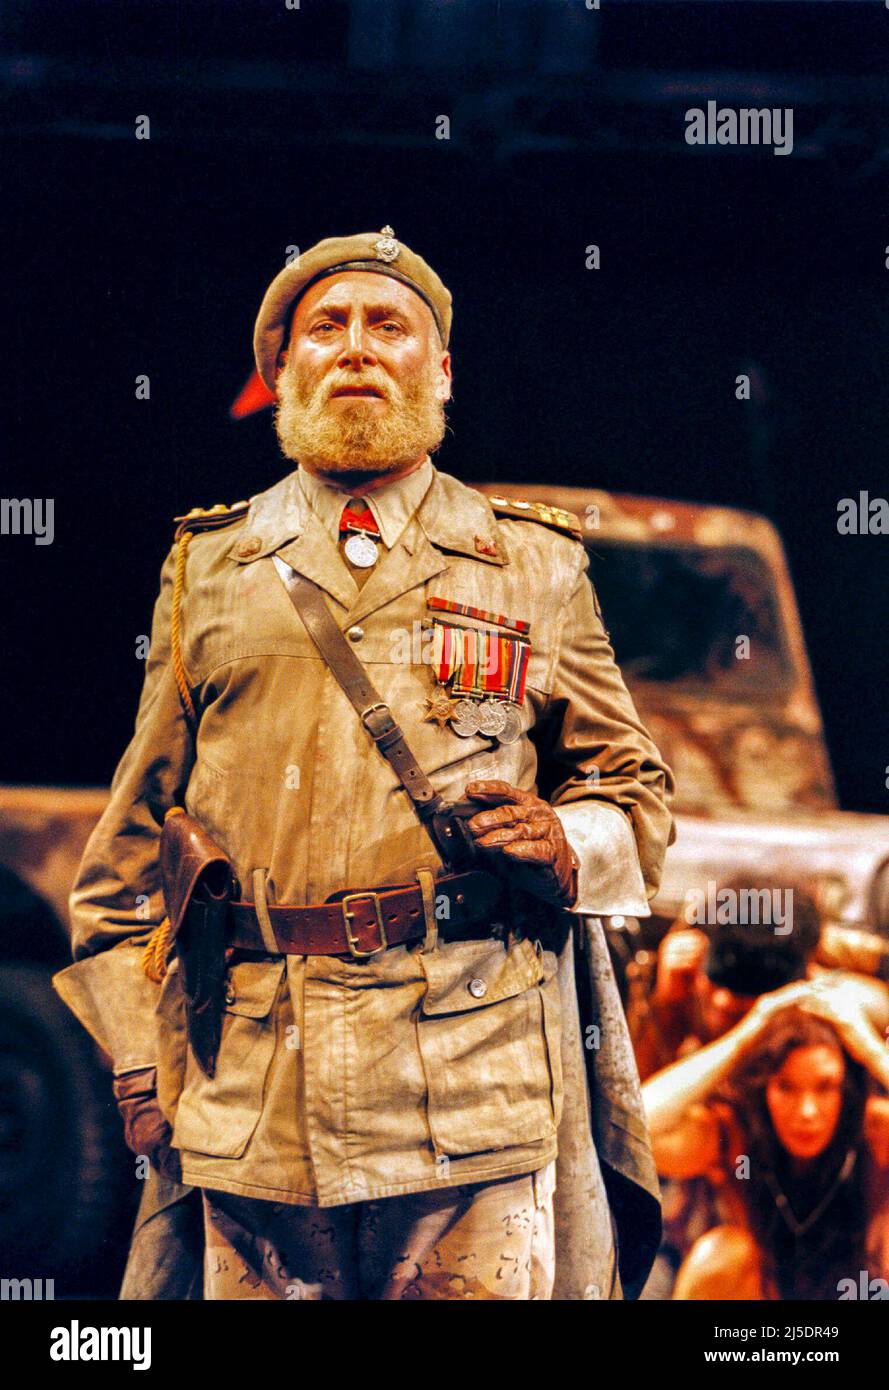 Antony Sher (Titus Andronicus) in TITUS ANDRONICUS by Shakespeare at the West Yorkshire Playhouse, Leeds, England  12/07/1995  a Market Theatre Johannesburg production  set design: Nadya Cohen  costumes: Sue Steele  lighting: Mark Jonathan  fights: Terry King  director: Gregory Doran Stock Photo